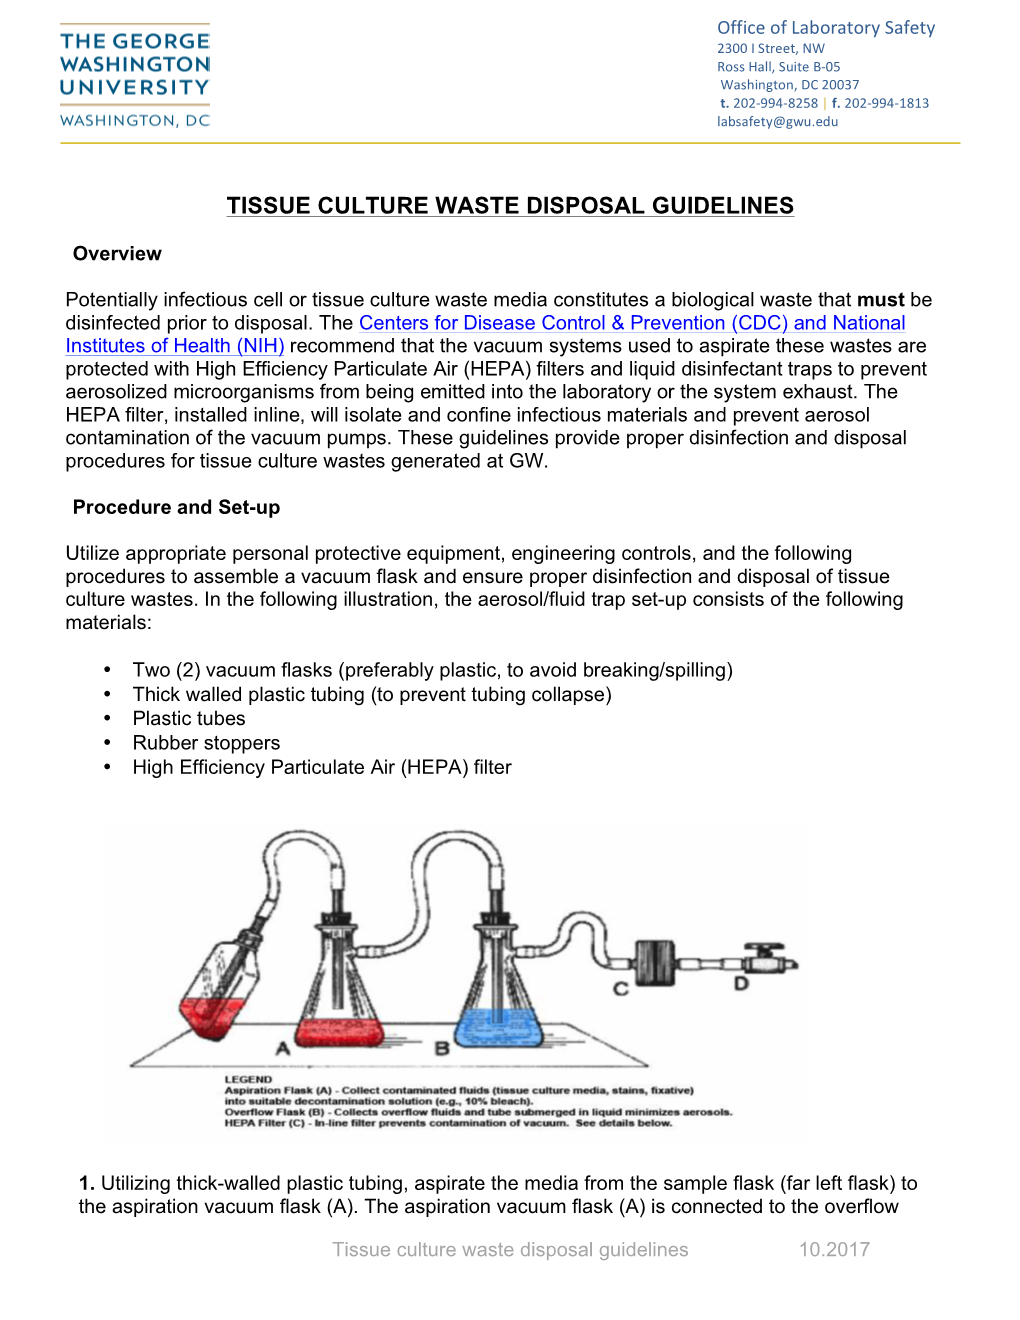 Tissue Culture Waste Disposal Guidelines